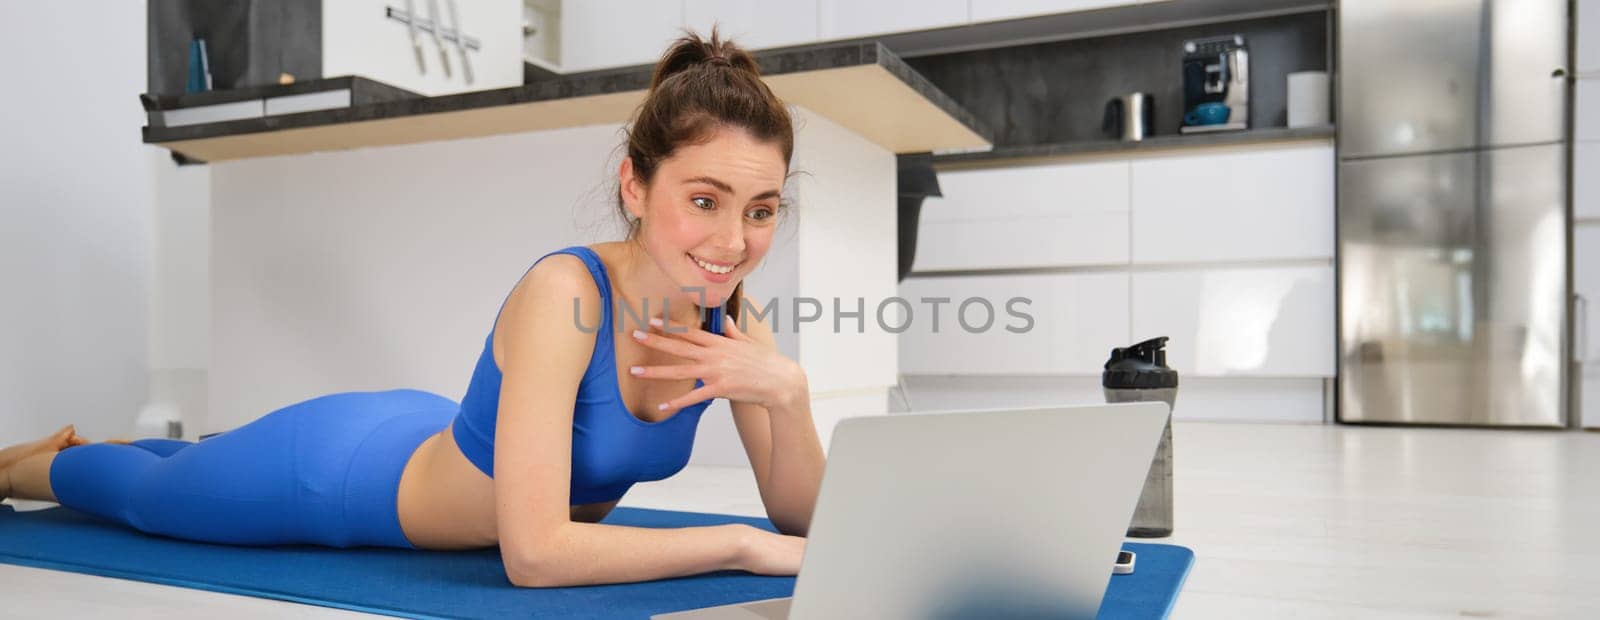 Sportswoman laying on fitness mat and looking surprised at laptop screen, talking with someone on video chat, doing workout exercises at home.